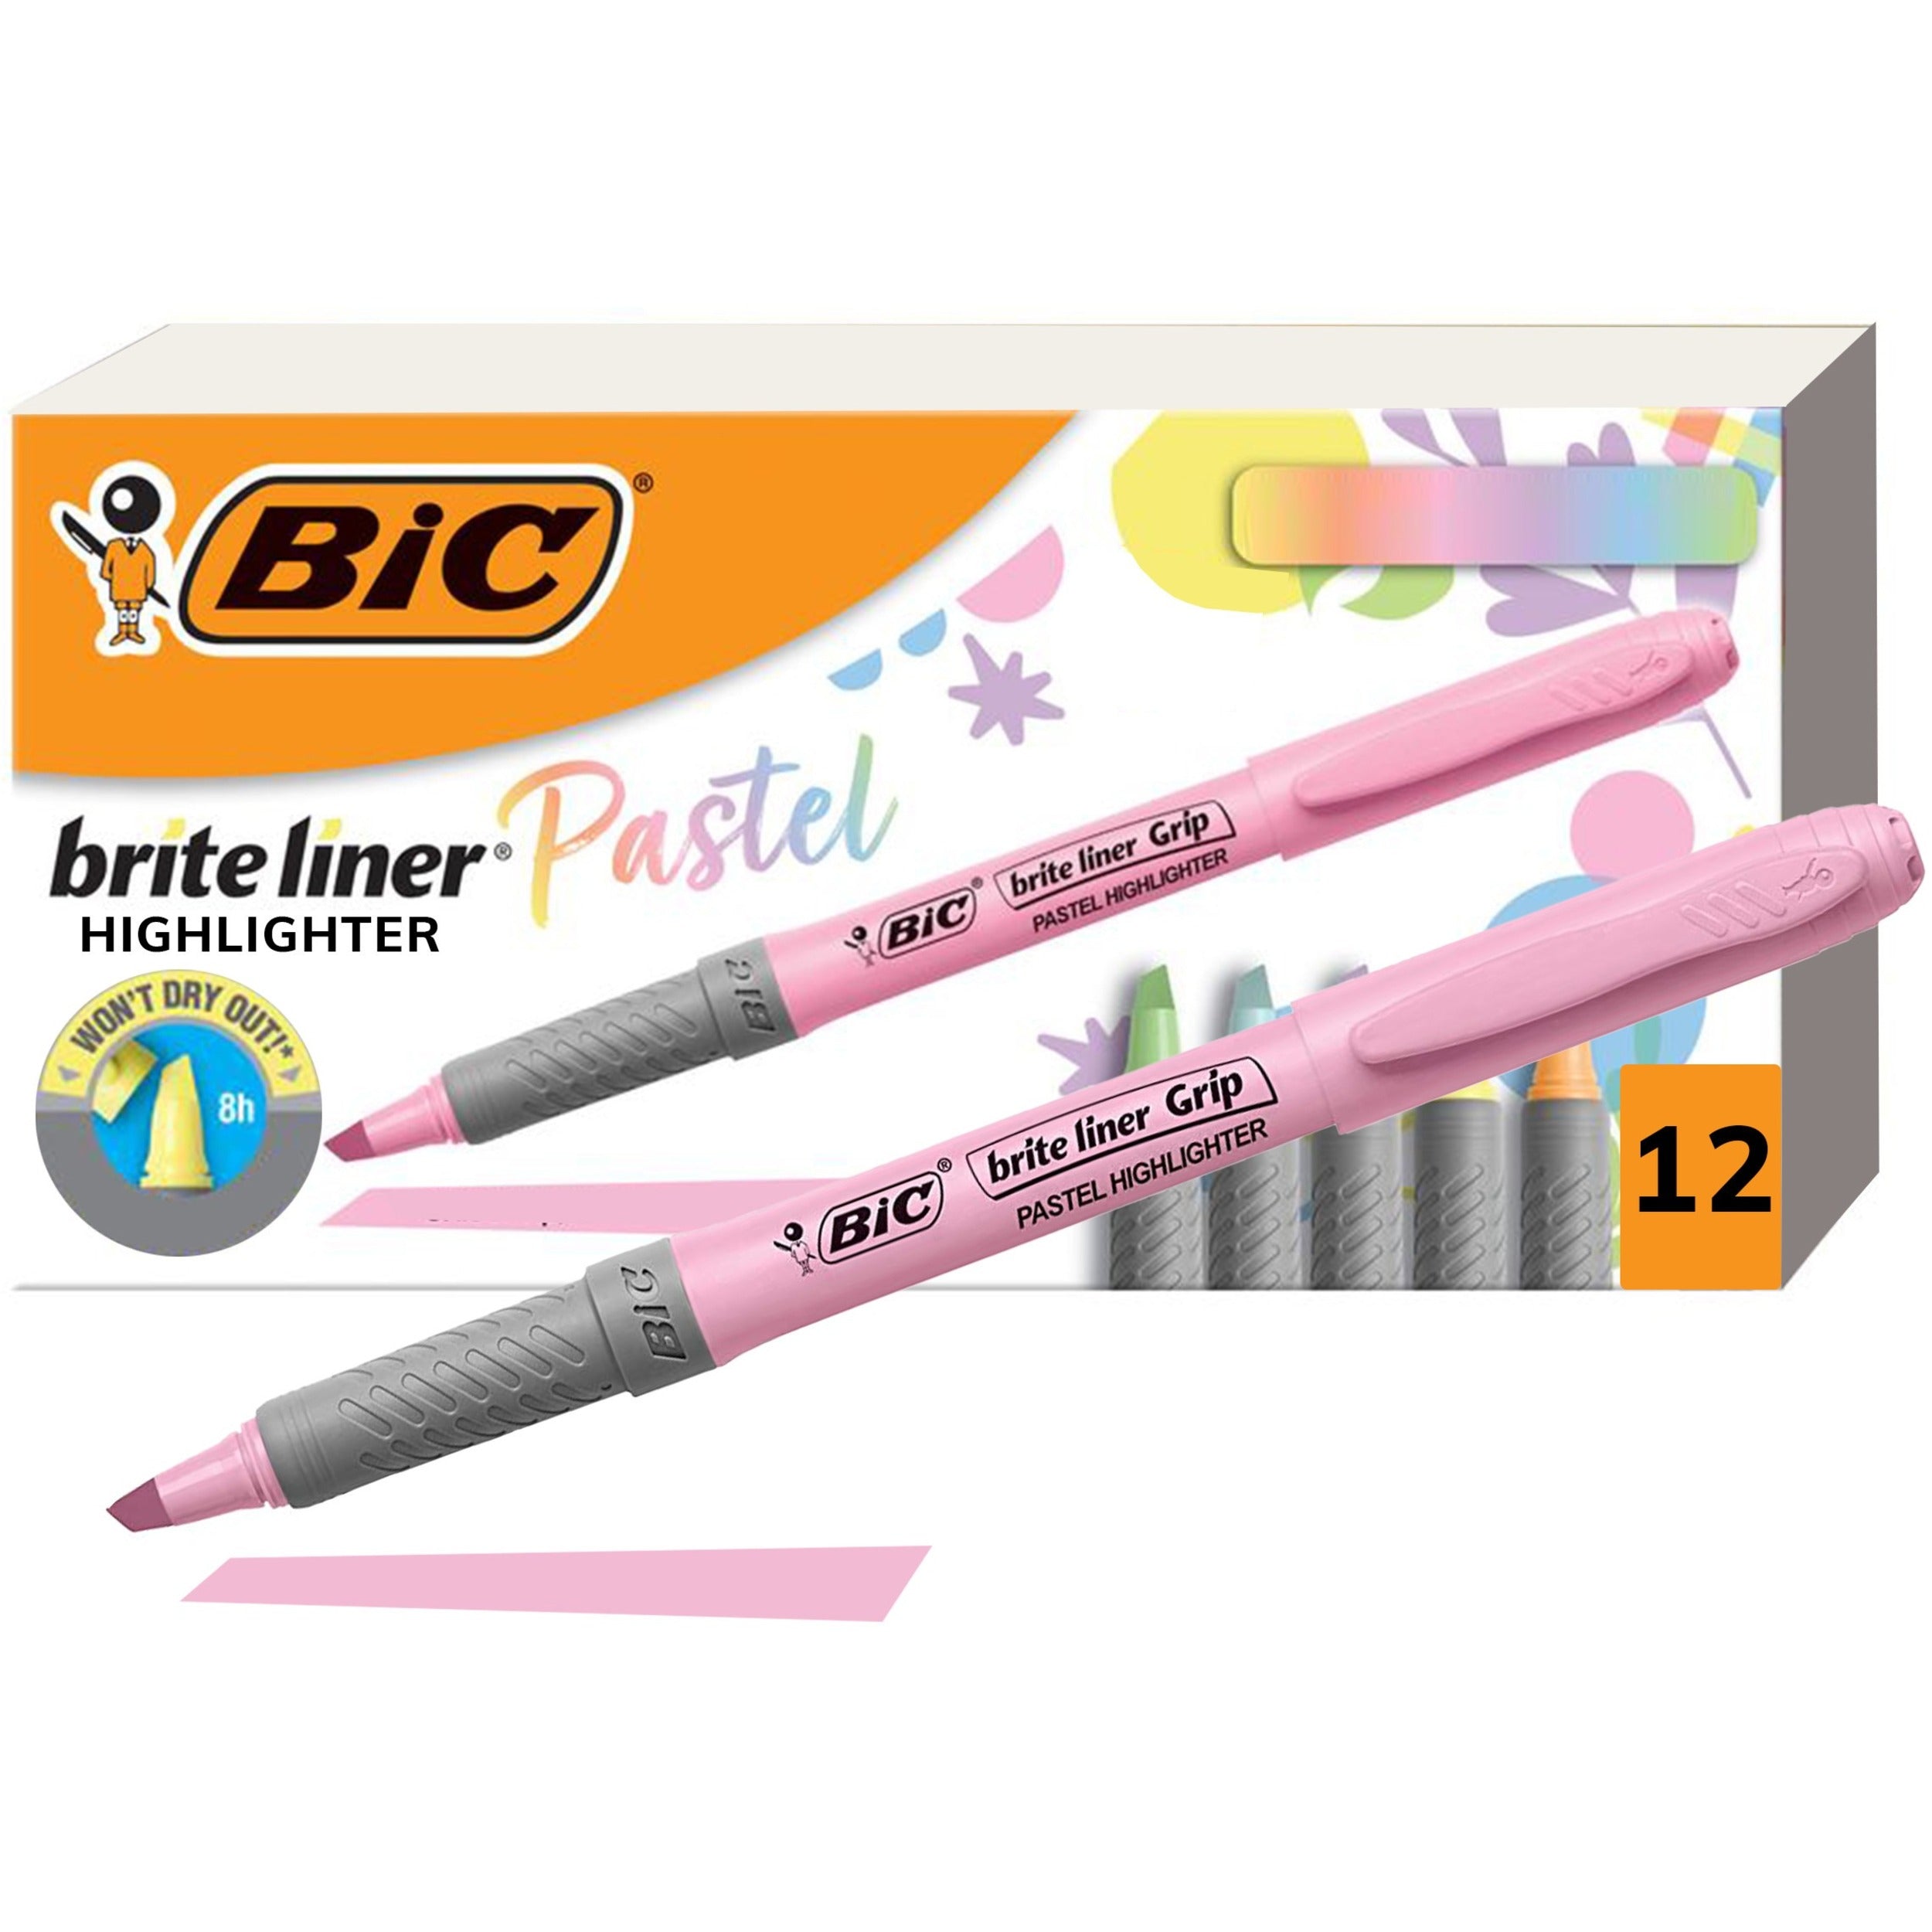 bic-brite-liner-grip-highlighters-assorted-12-pack-16-mm-marker-point-size-chisel-marker-point-style-assorted-pastel-yellow-pastel-pink-pastel-blue-pastel-green-pastel-purple-pastel-orange-12-pack_bicgbld11ast - 1